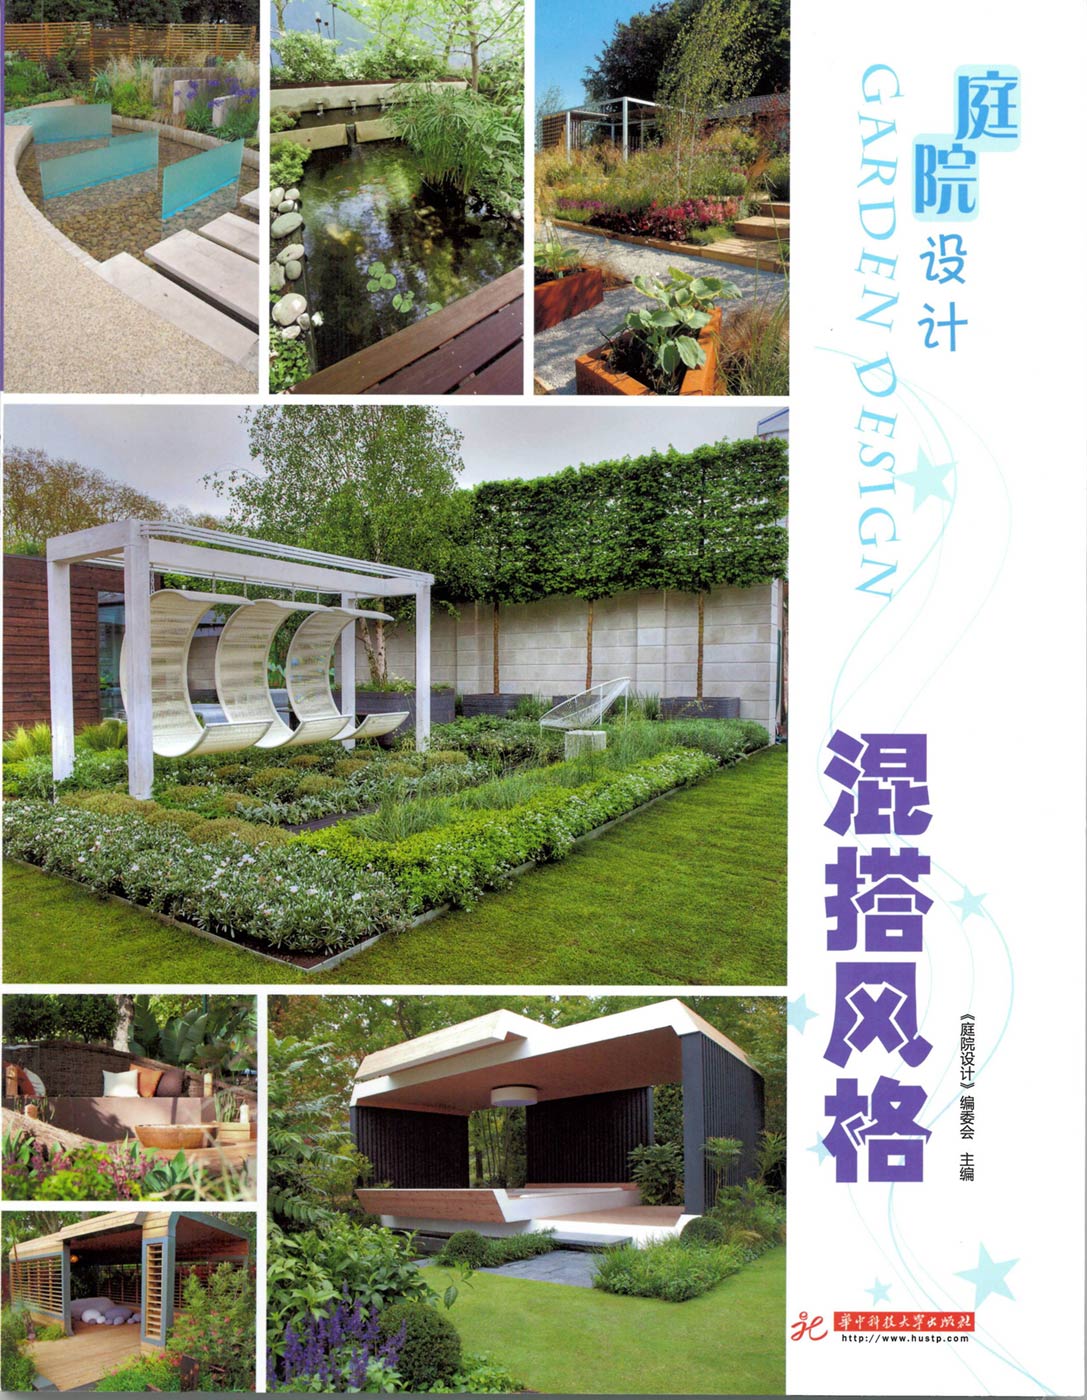 Our project “Erol House” is published on Garden Design Magazine